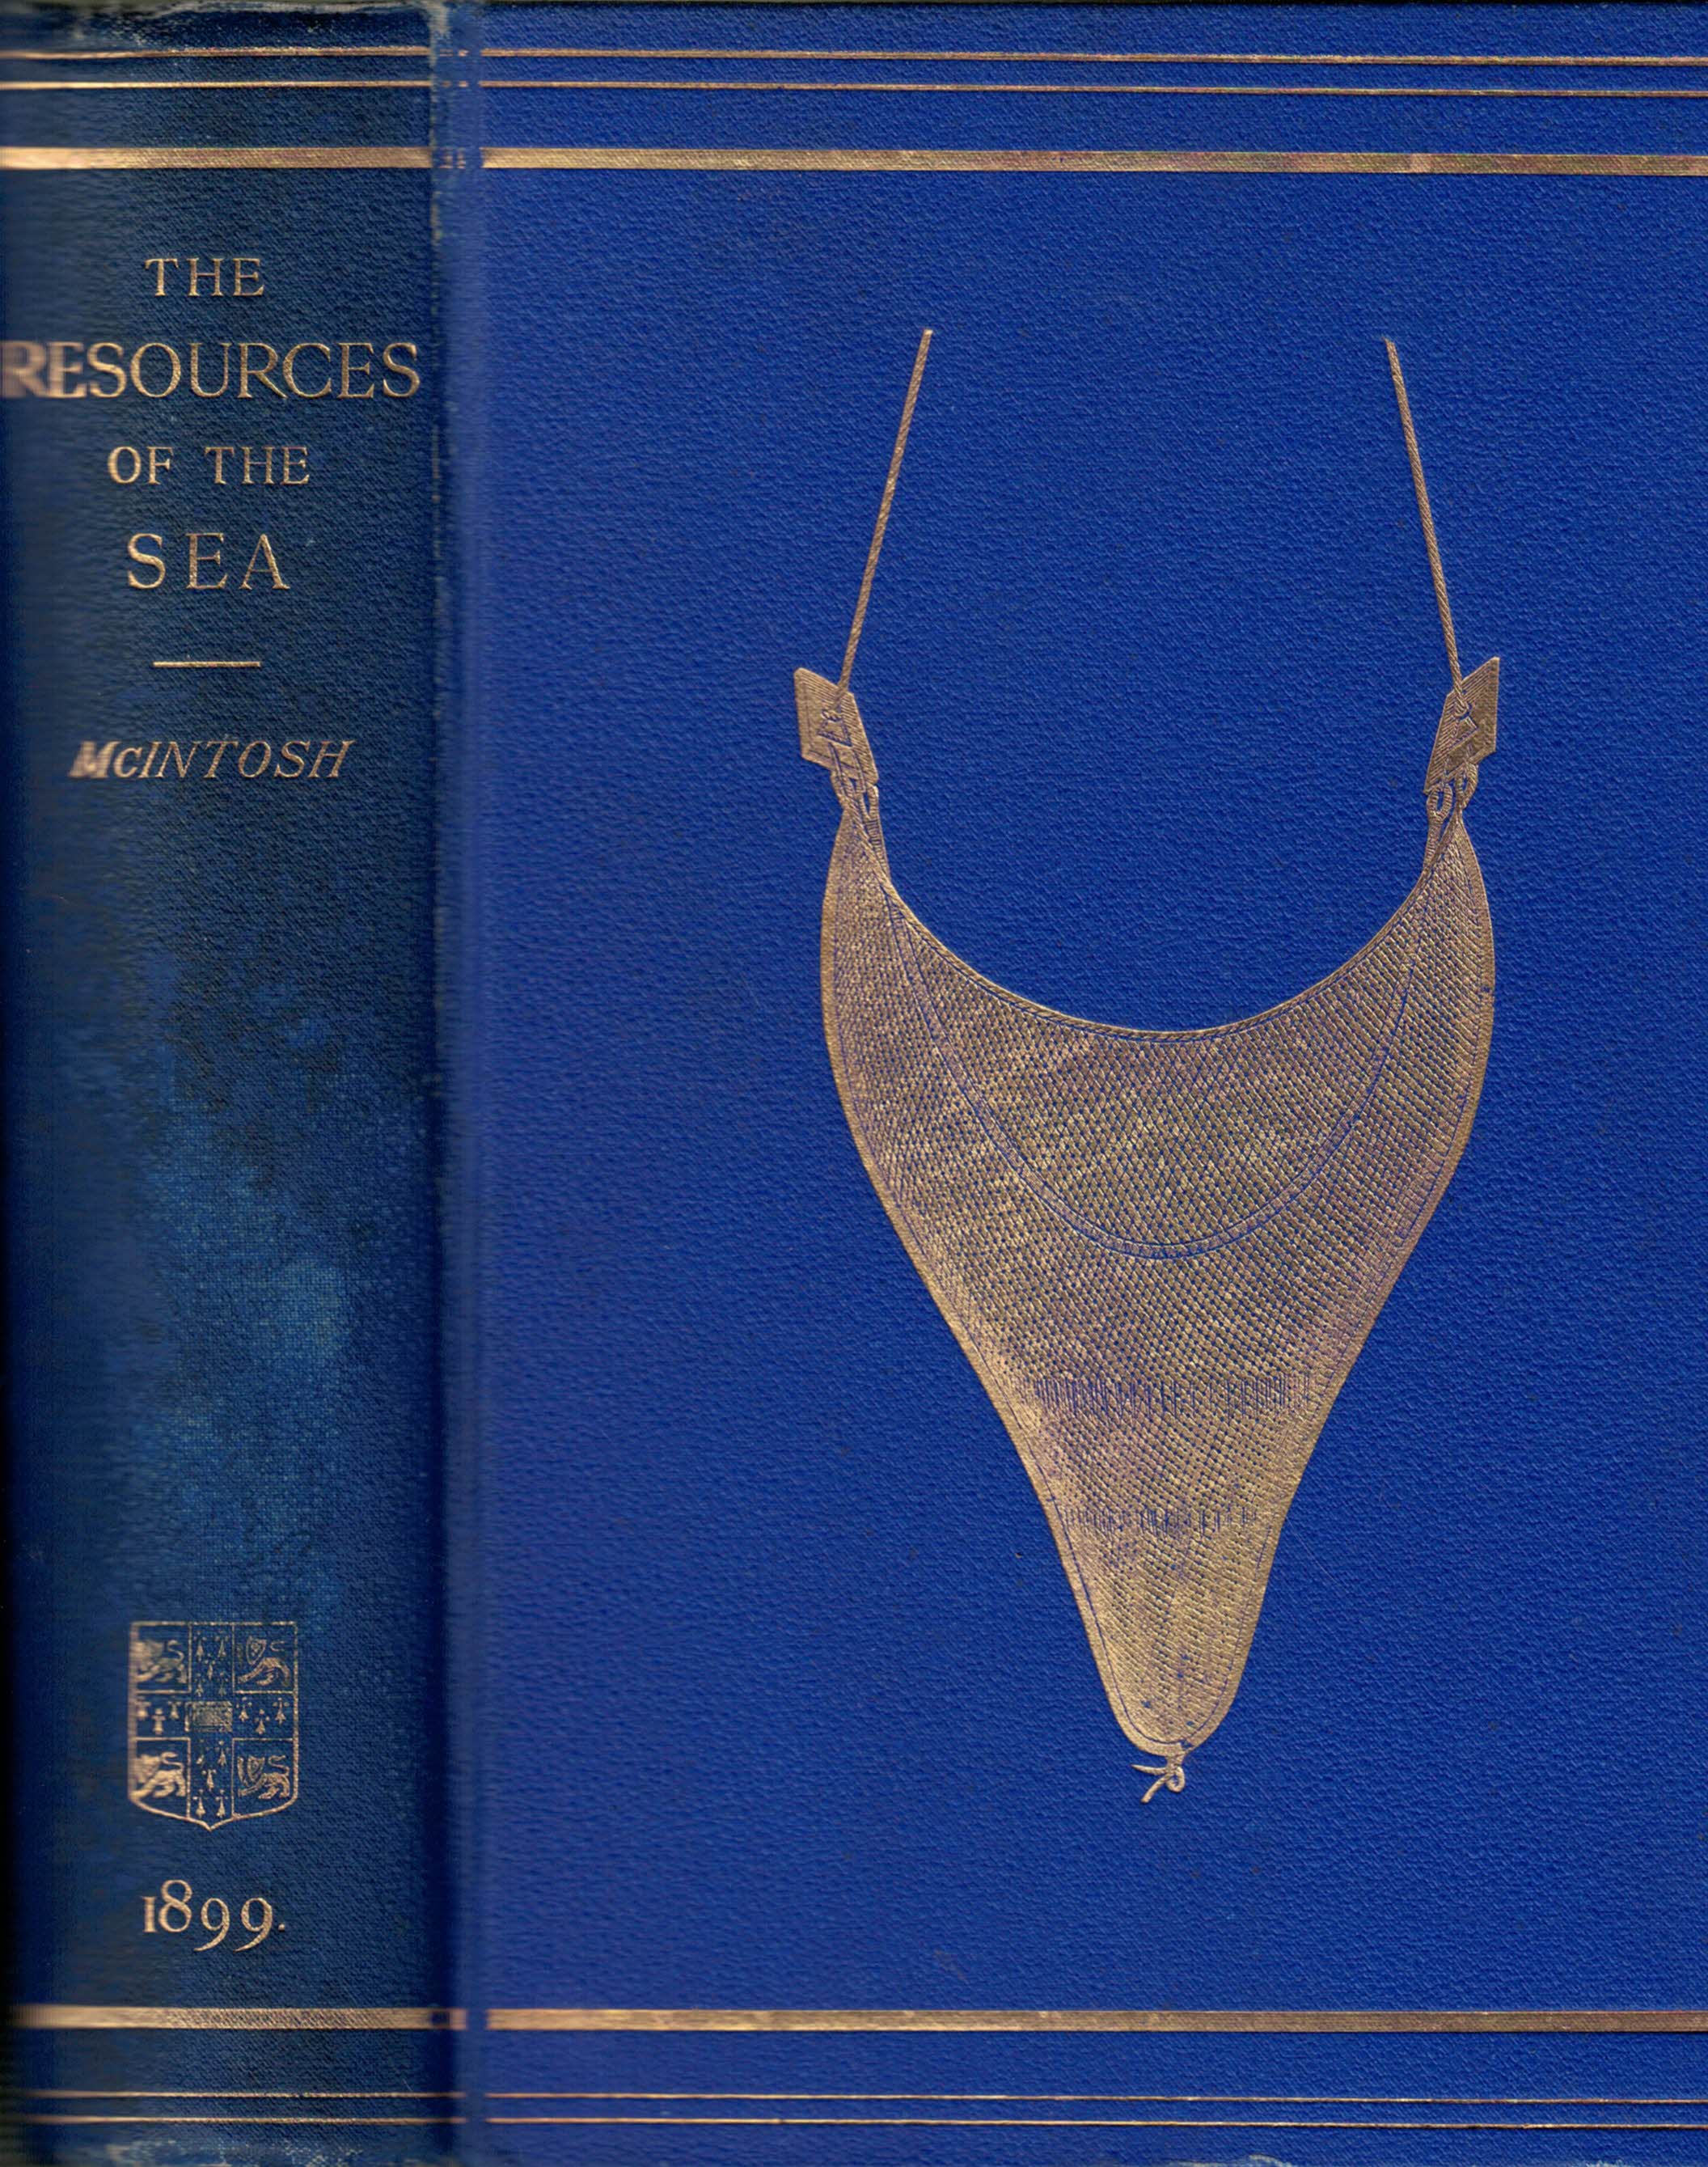 The Resources of the Sea as Shown in the Scientific Experiments to Test the Effects of Trawling and of the Closure of Certain Areas off the Scottish Shores